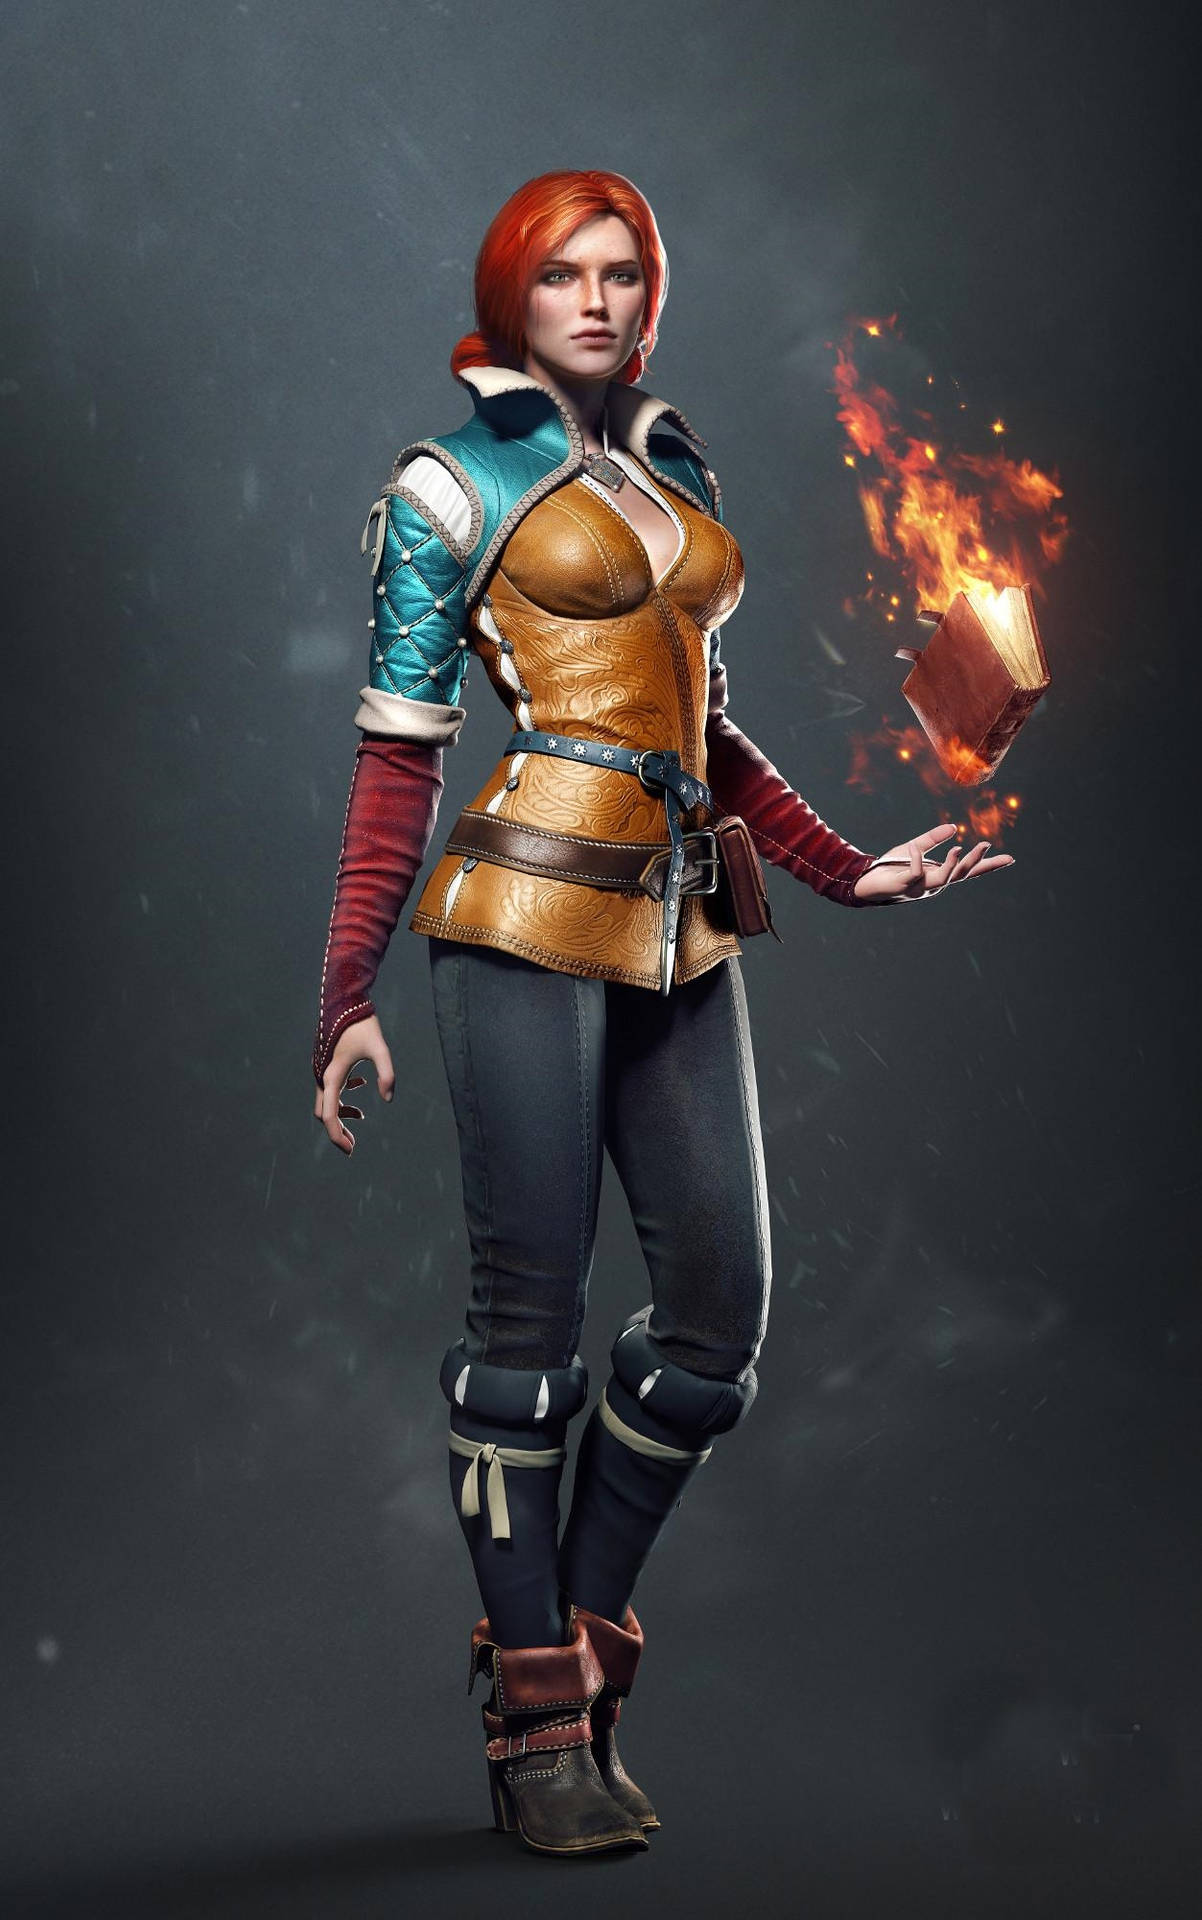 Witcher3 Android Triss Mit Feuer Wallpaper